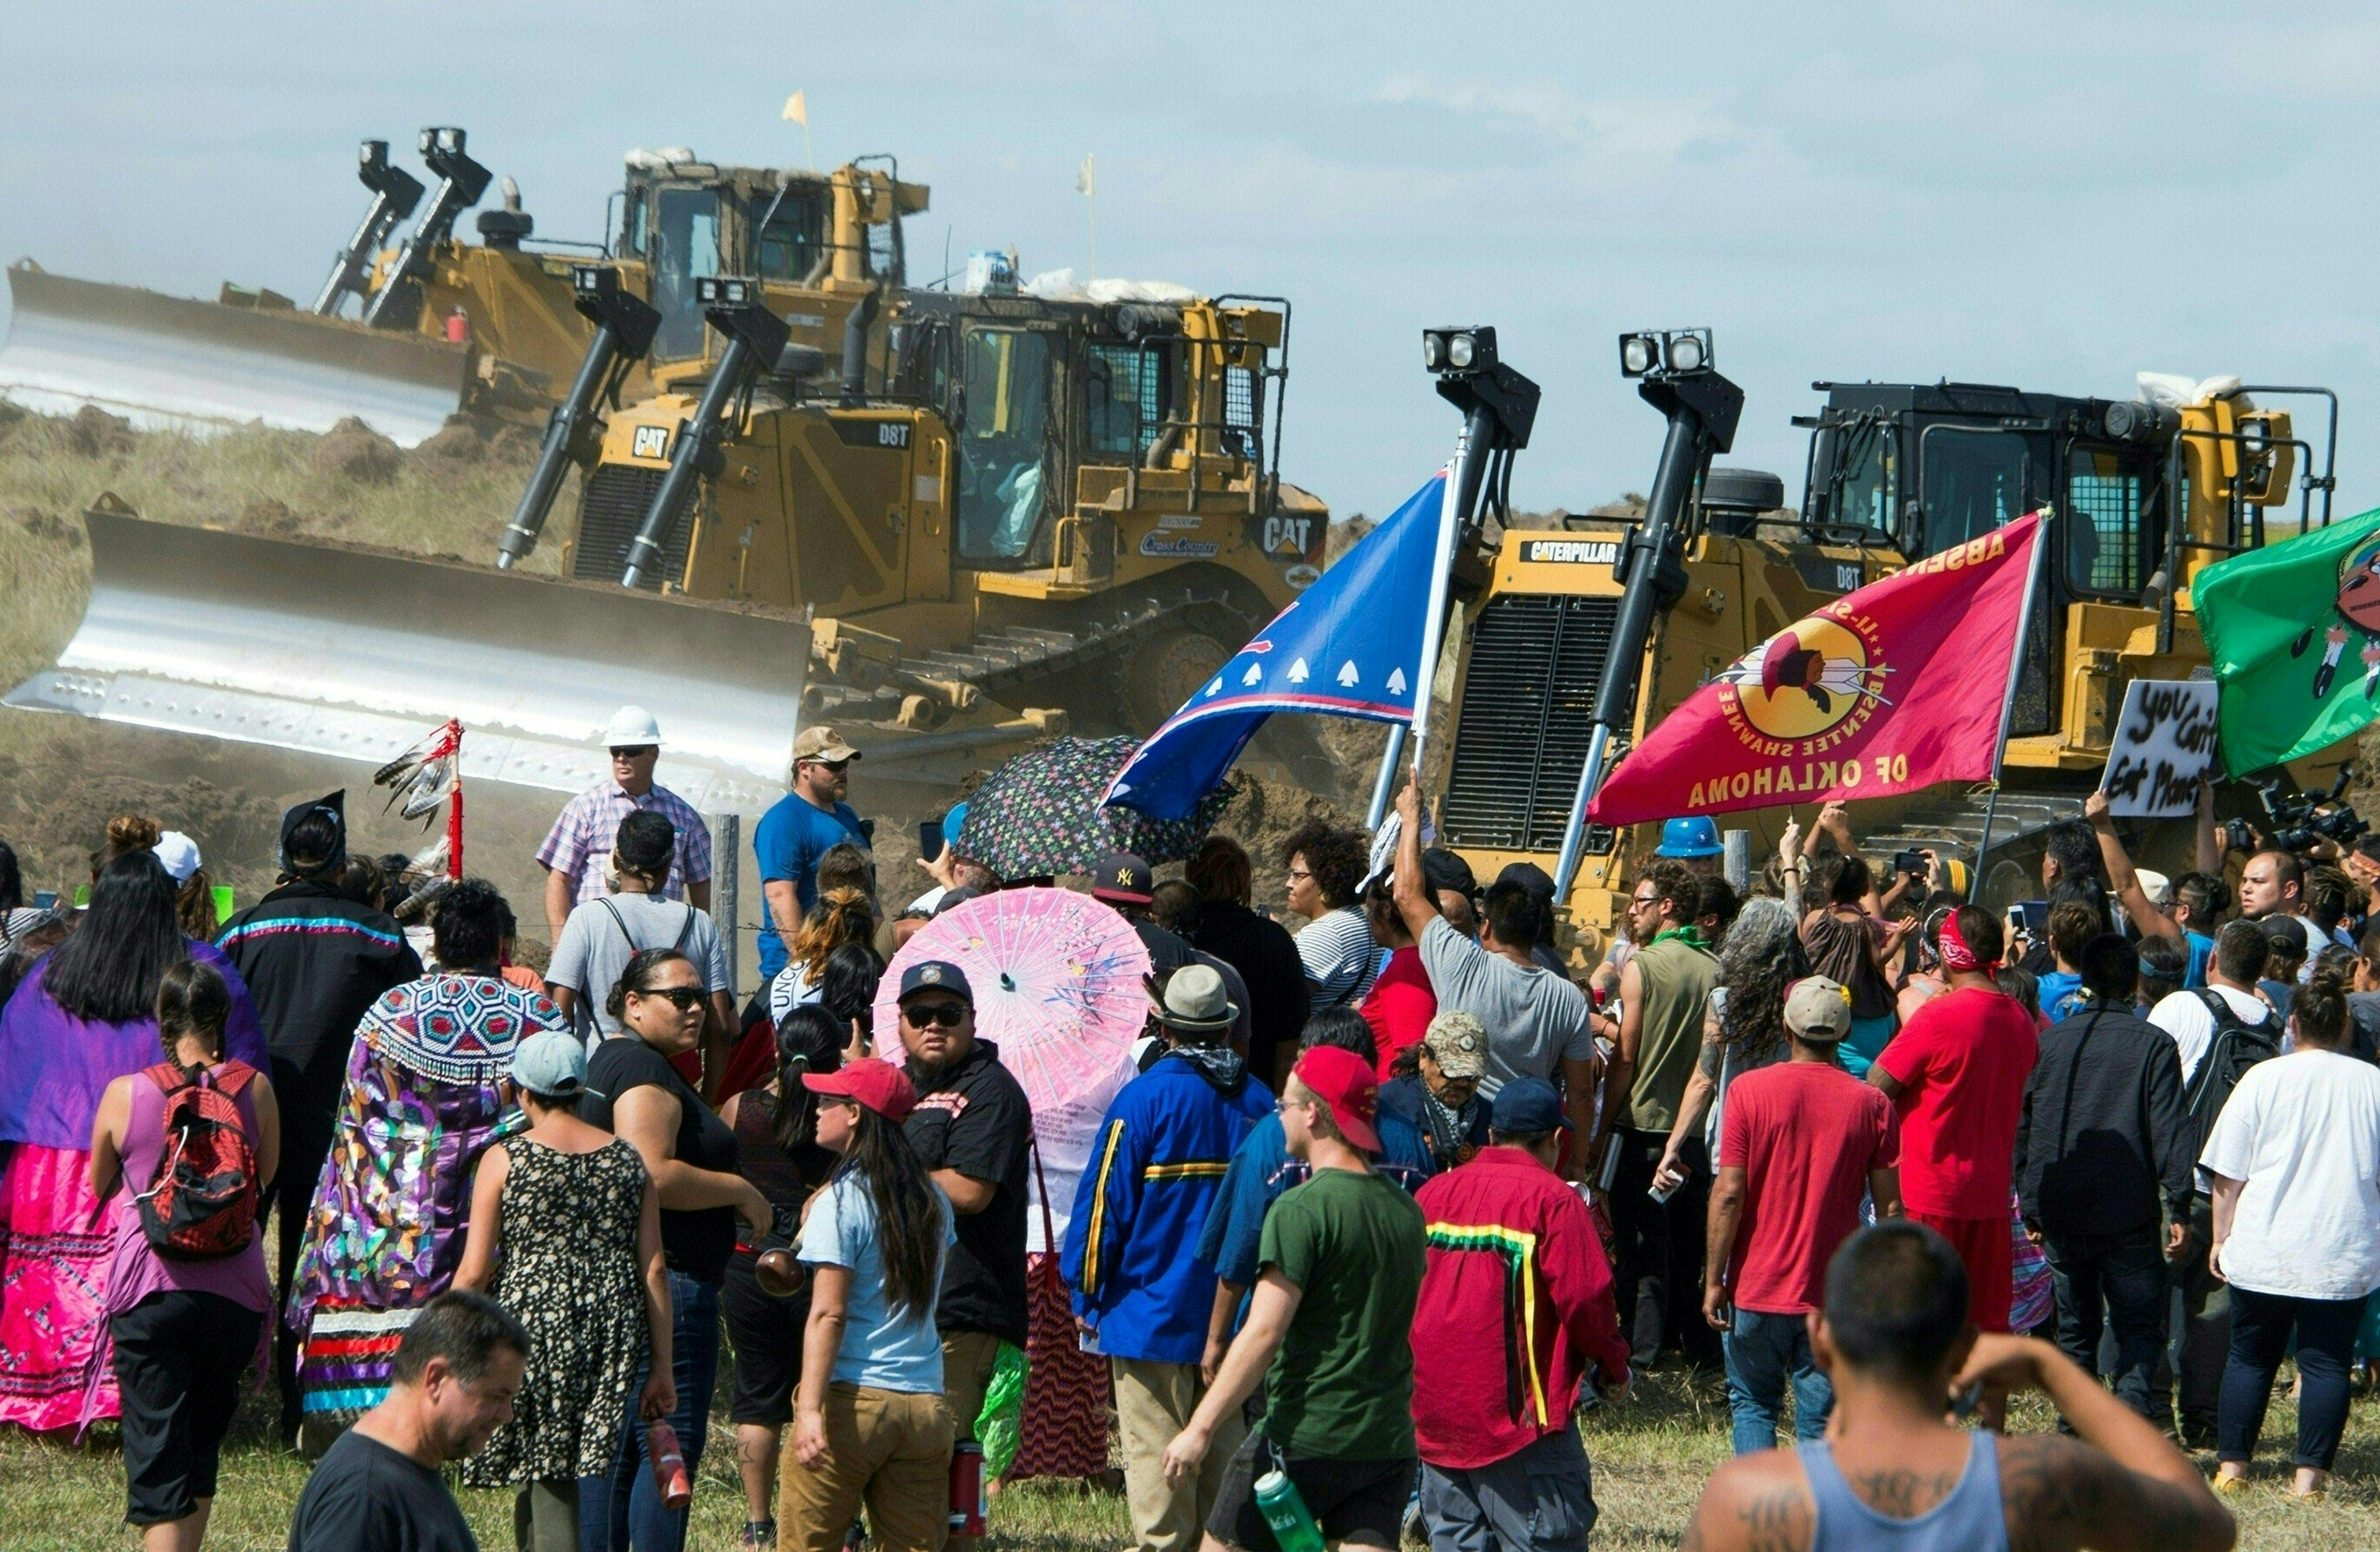 Members of the Standing Rock Sioux Tribe and their supporters opposed to the Dakota Access Pipeline (DAPL) confront bulldozers working on the new oil pipeline in an effort to make them stop, September 3, 2016, near Cannon Ball, North Dakota. / AFP / Robyn BECK / TO GO WITH AFP STORY by Nova SAFO, "Native Americans united by oil pipeline fight. Photo Robyn Beck/AFP/Getty Images.